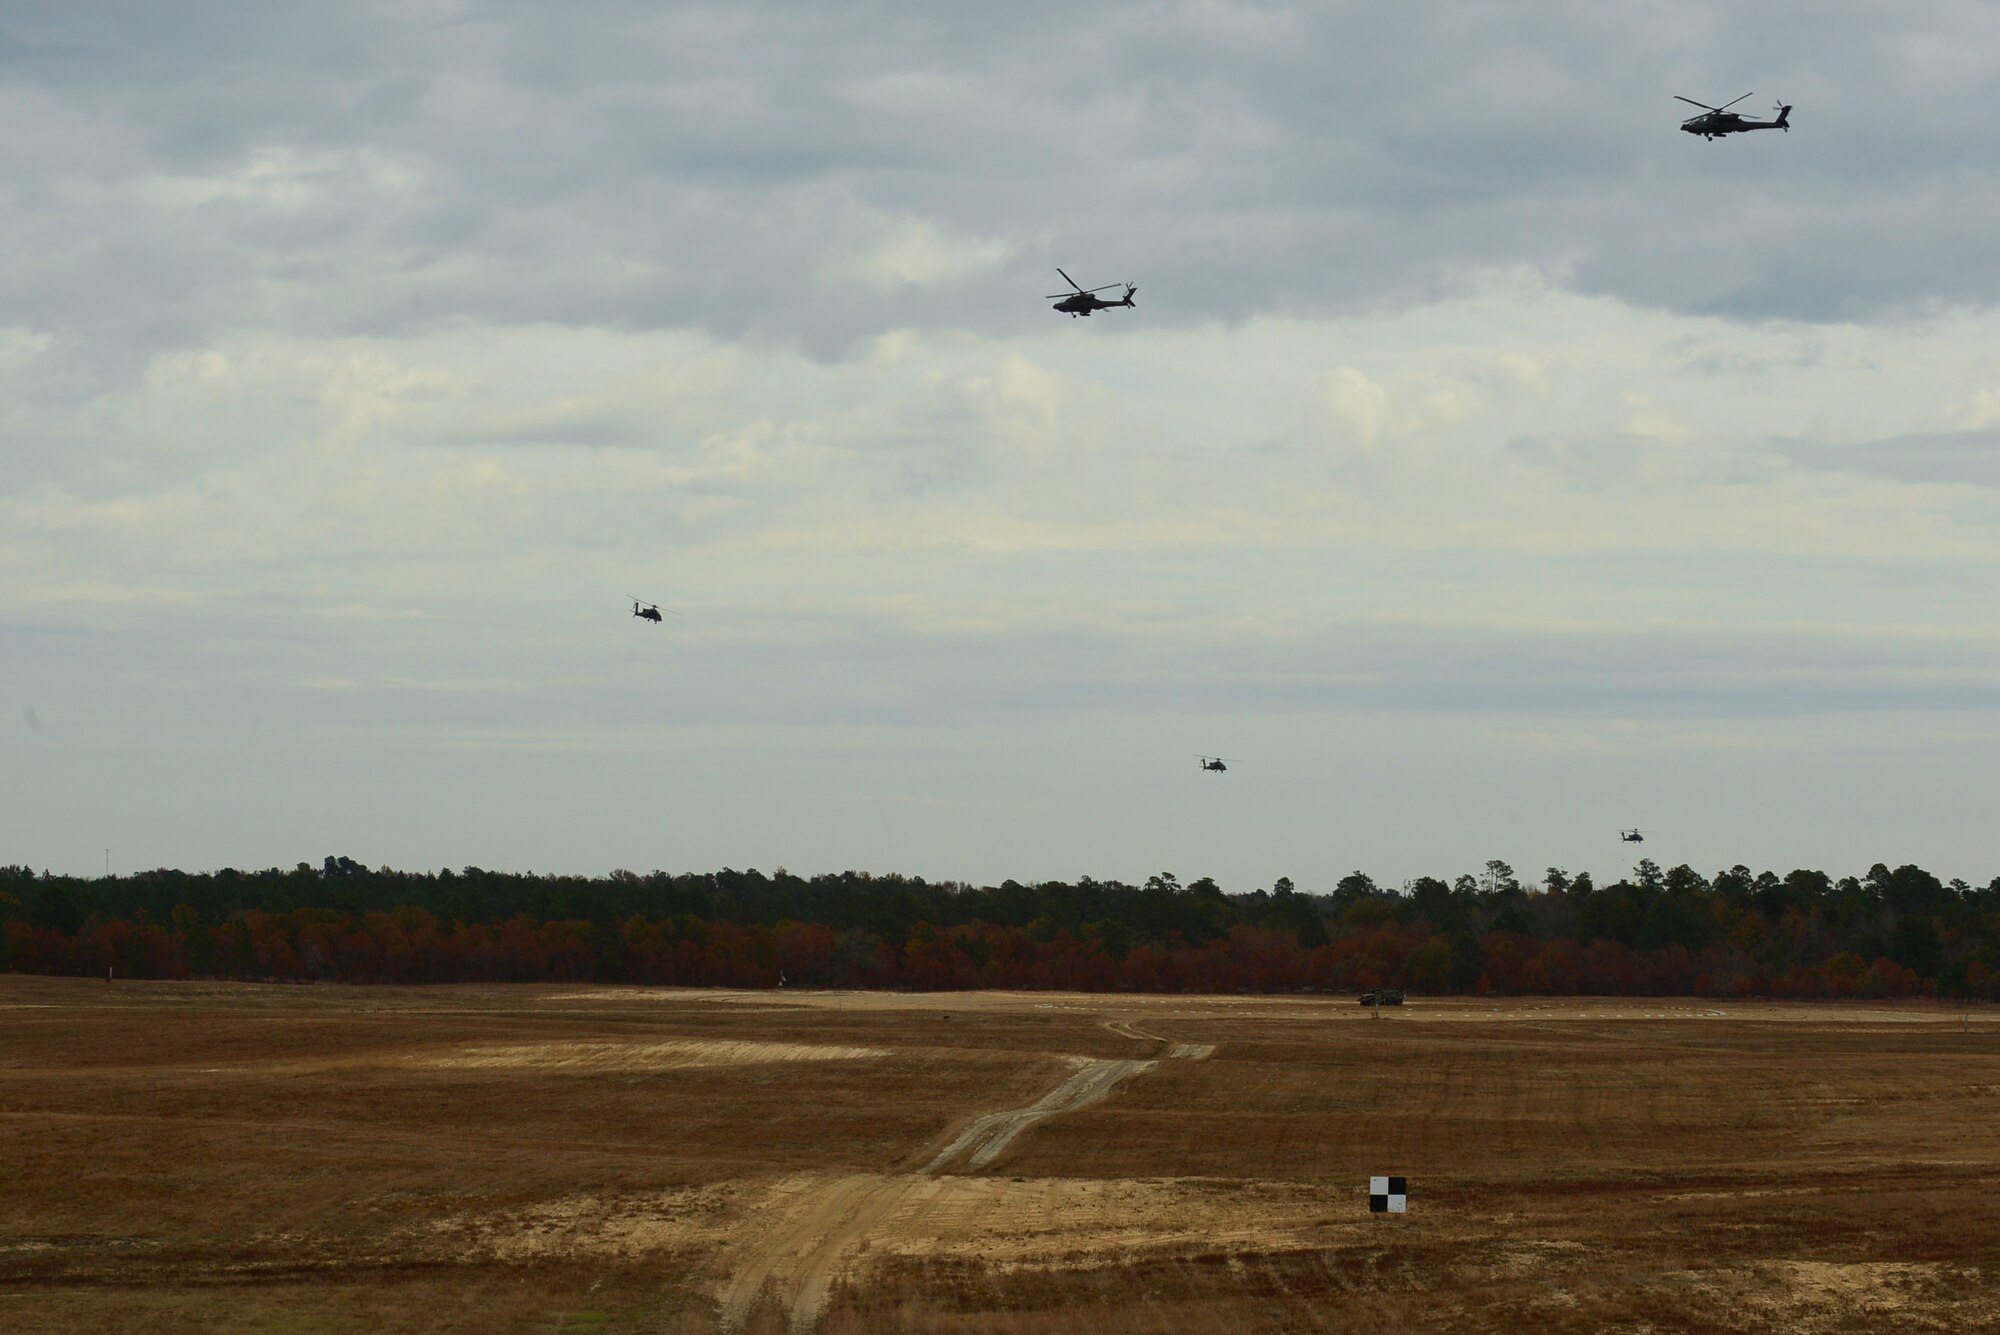 AH-64 Apaches assigned to the 1-130 Attack Recon Battalion, North Carolina Army National Guard, based at the Raleigh-Durham International Airport, train at Poinsett Electronic Combat Range, Sumter, S.C., Nov. 13, 2014. Ten Apaches flew to Poinsett to train on the range. In addition to training with electronic warfare, the pilots also had smoky SAMS (surface-to-air missiles) launched in their vicinity. (U.S. Air Force photo by Airman 1st Class Diana M. Cossaboom/Released)